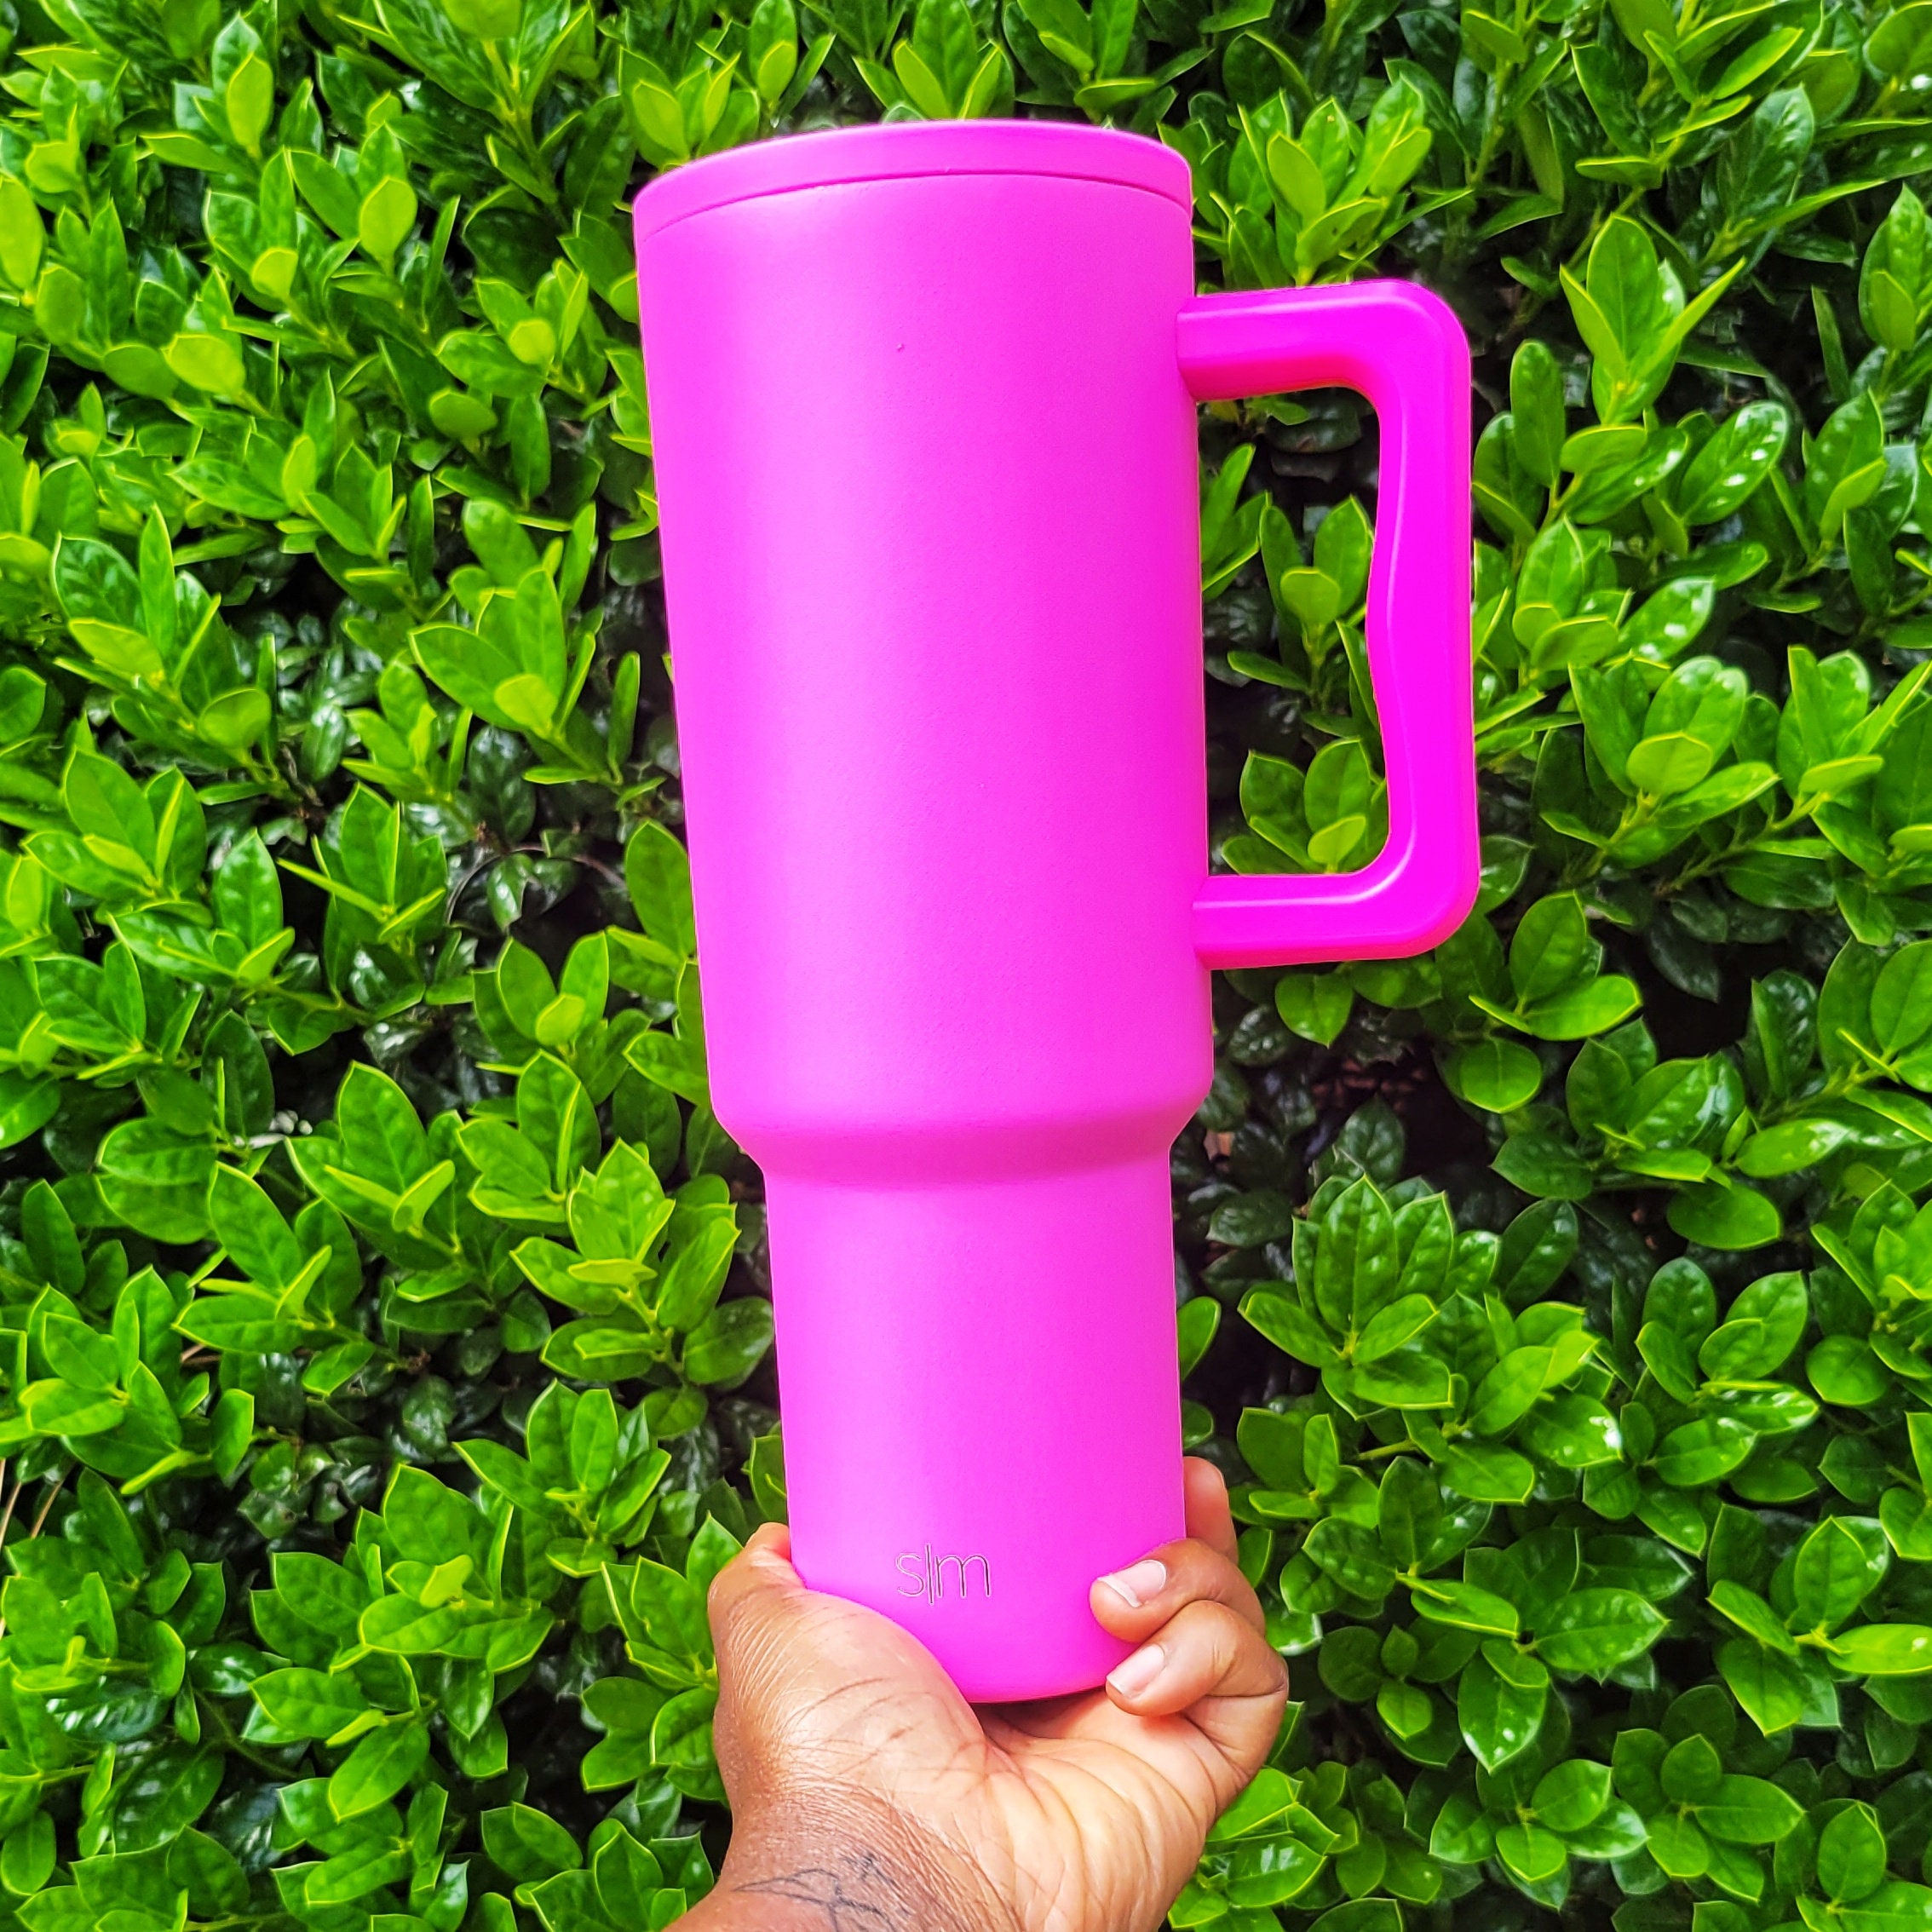 Simple Modern Tumbler Pink 20 oz Great condition - Depop